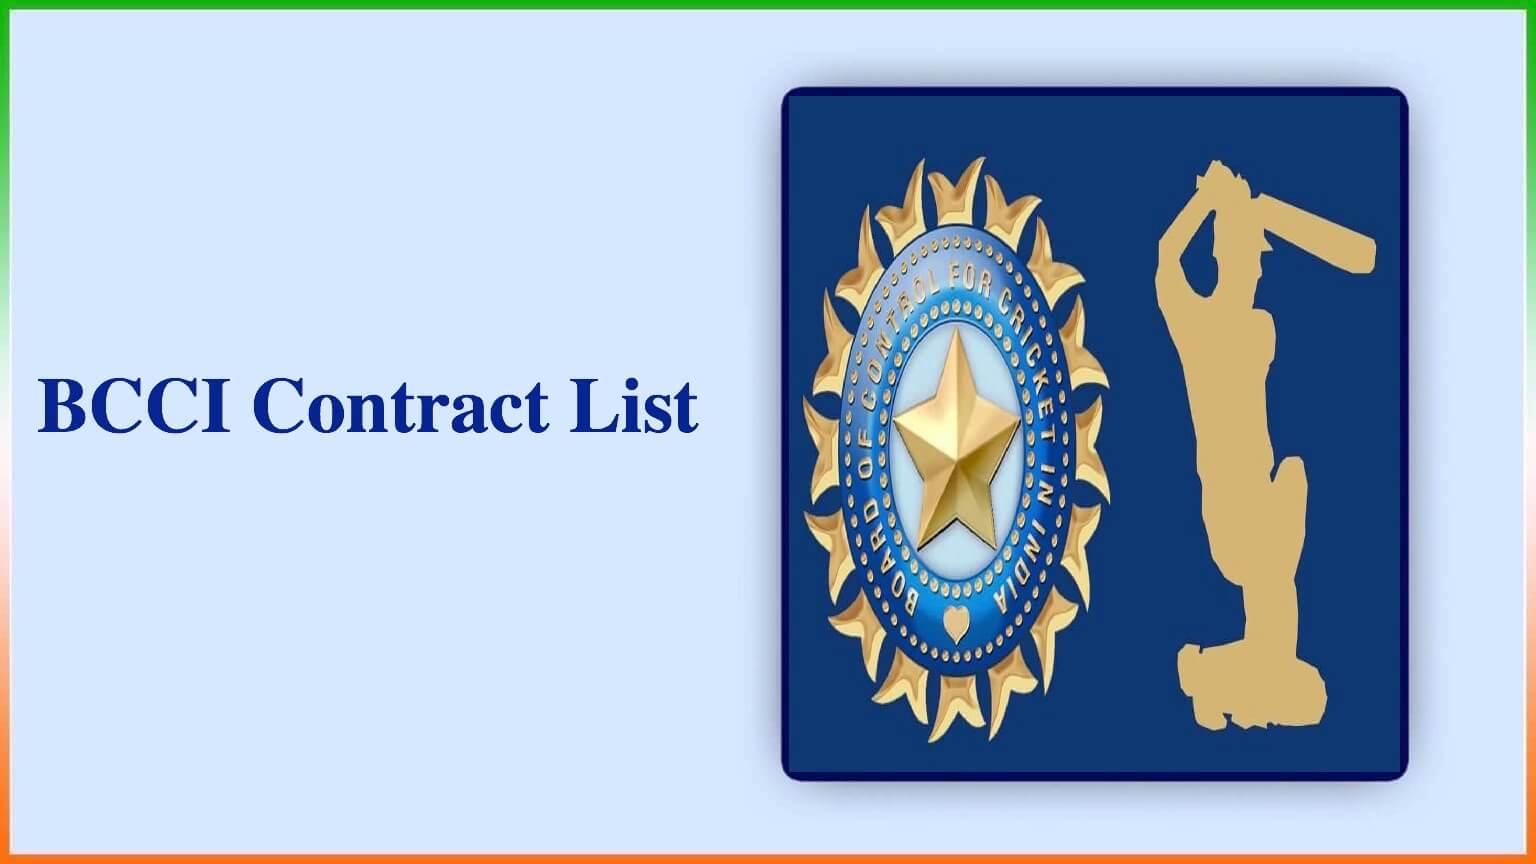 Bcci Contract List